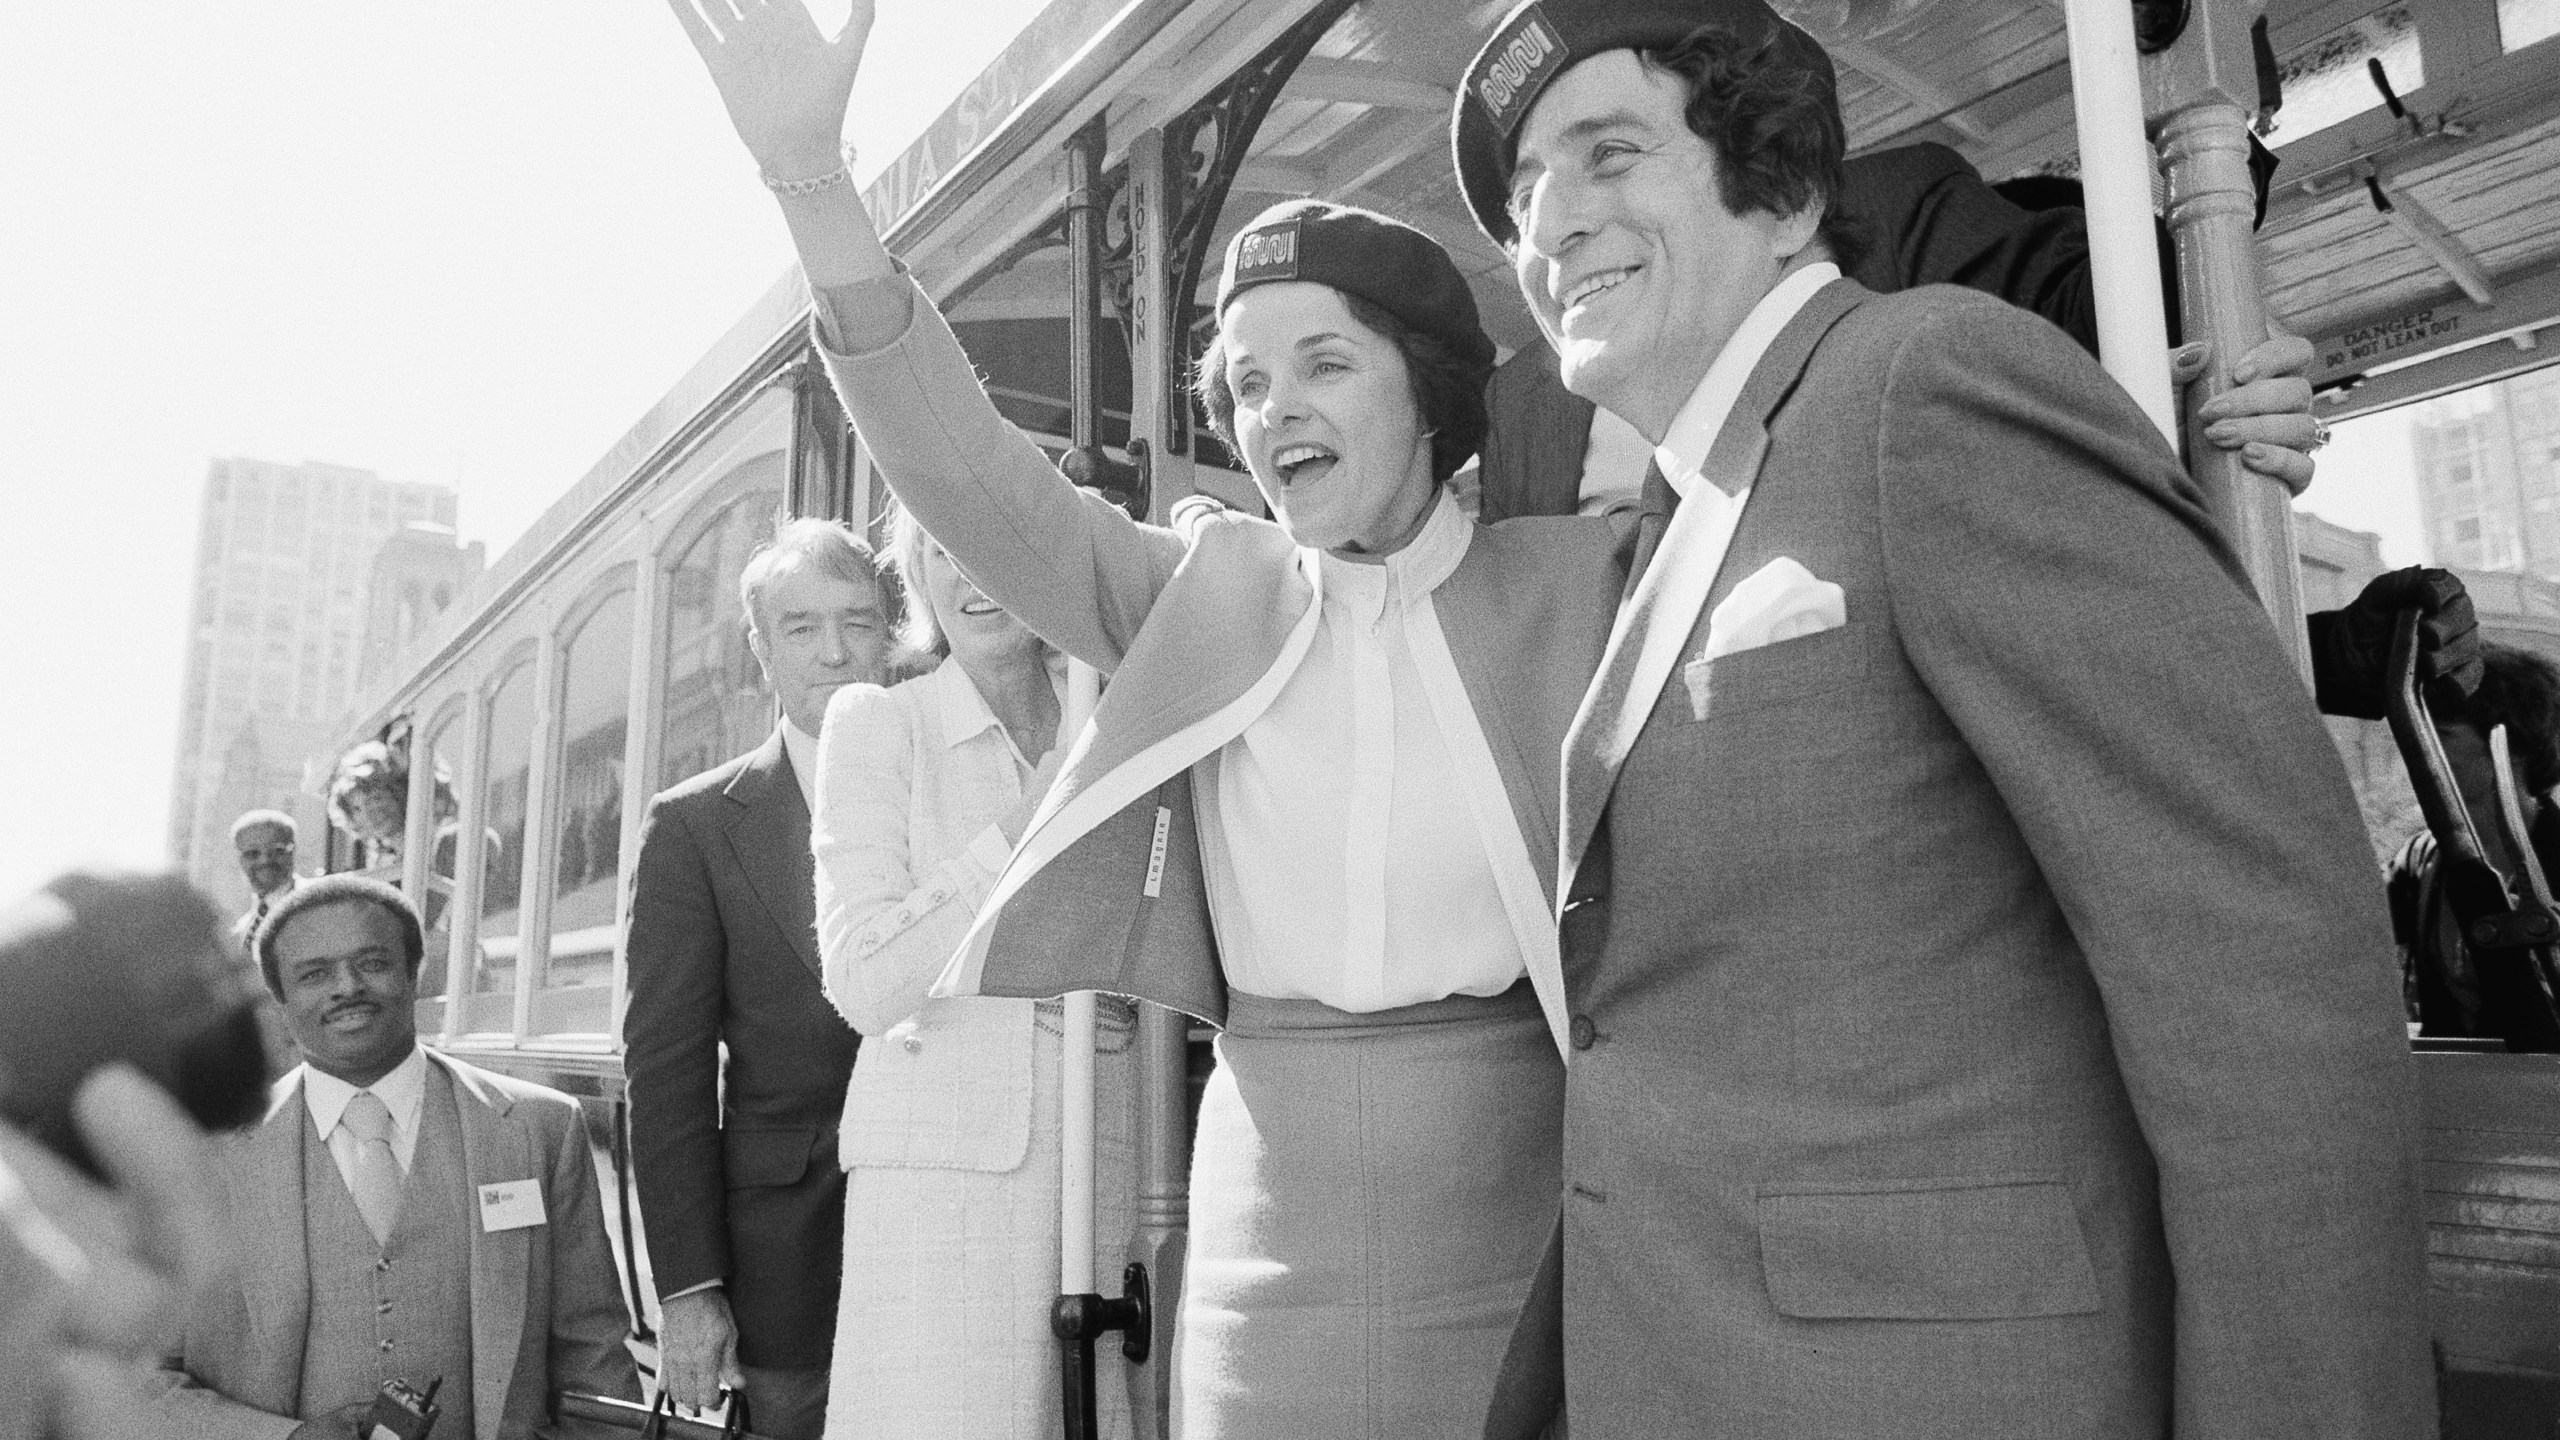 FILE - San Francisco Mayor Dianne Feinstein and singer Tony Bennett, who sang " I Left My Heart in San Francisco," hangs on to the outside of a cable car in San Francisco before taking a test ride, May 2, 1984. Bennett loved San Francisco and its cable cars and in return, the city has dedicated one of those cable cars to the famous crooner, who died in July 2023. Cable car 53, built in 1907, has several plaques and painted gold ribbons remembering Bennett. (AP Photo/Jeff Reinking, File)